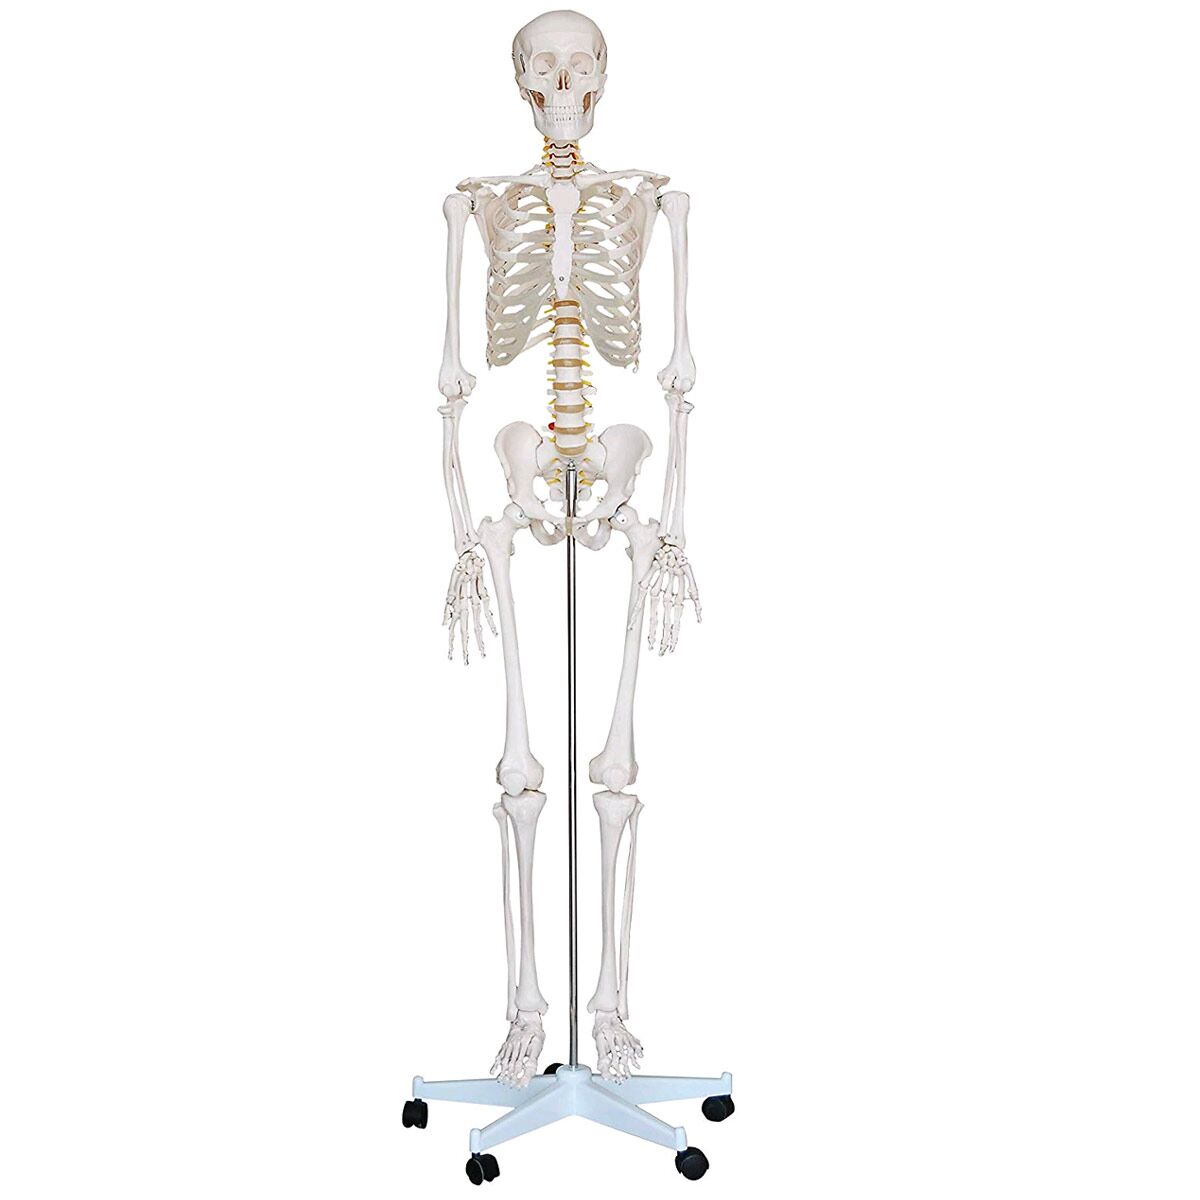 Human Anatomy Skeleton - Full Size Model 6 ft. Tall with Stand - Buy  Hospital, Healthcare equipment, accessories and machines online at  Mygetwellstore